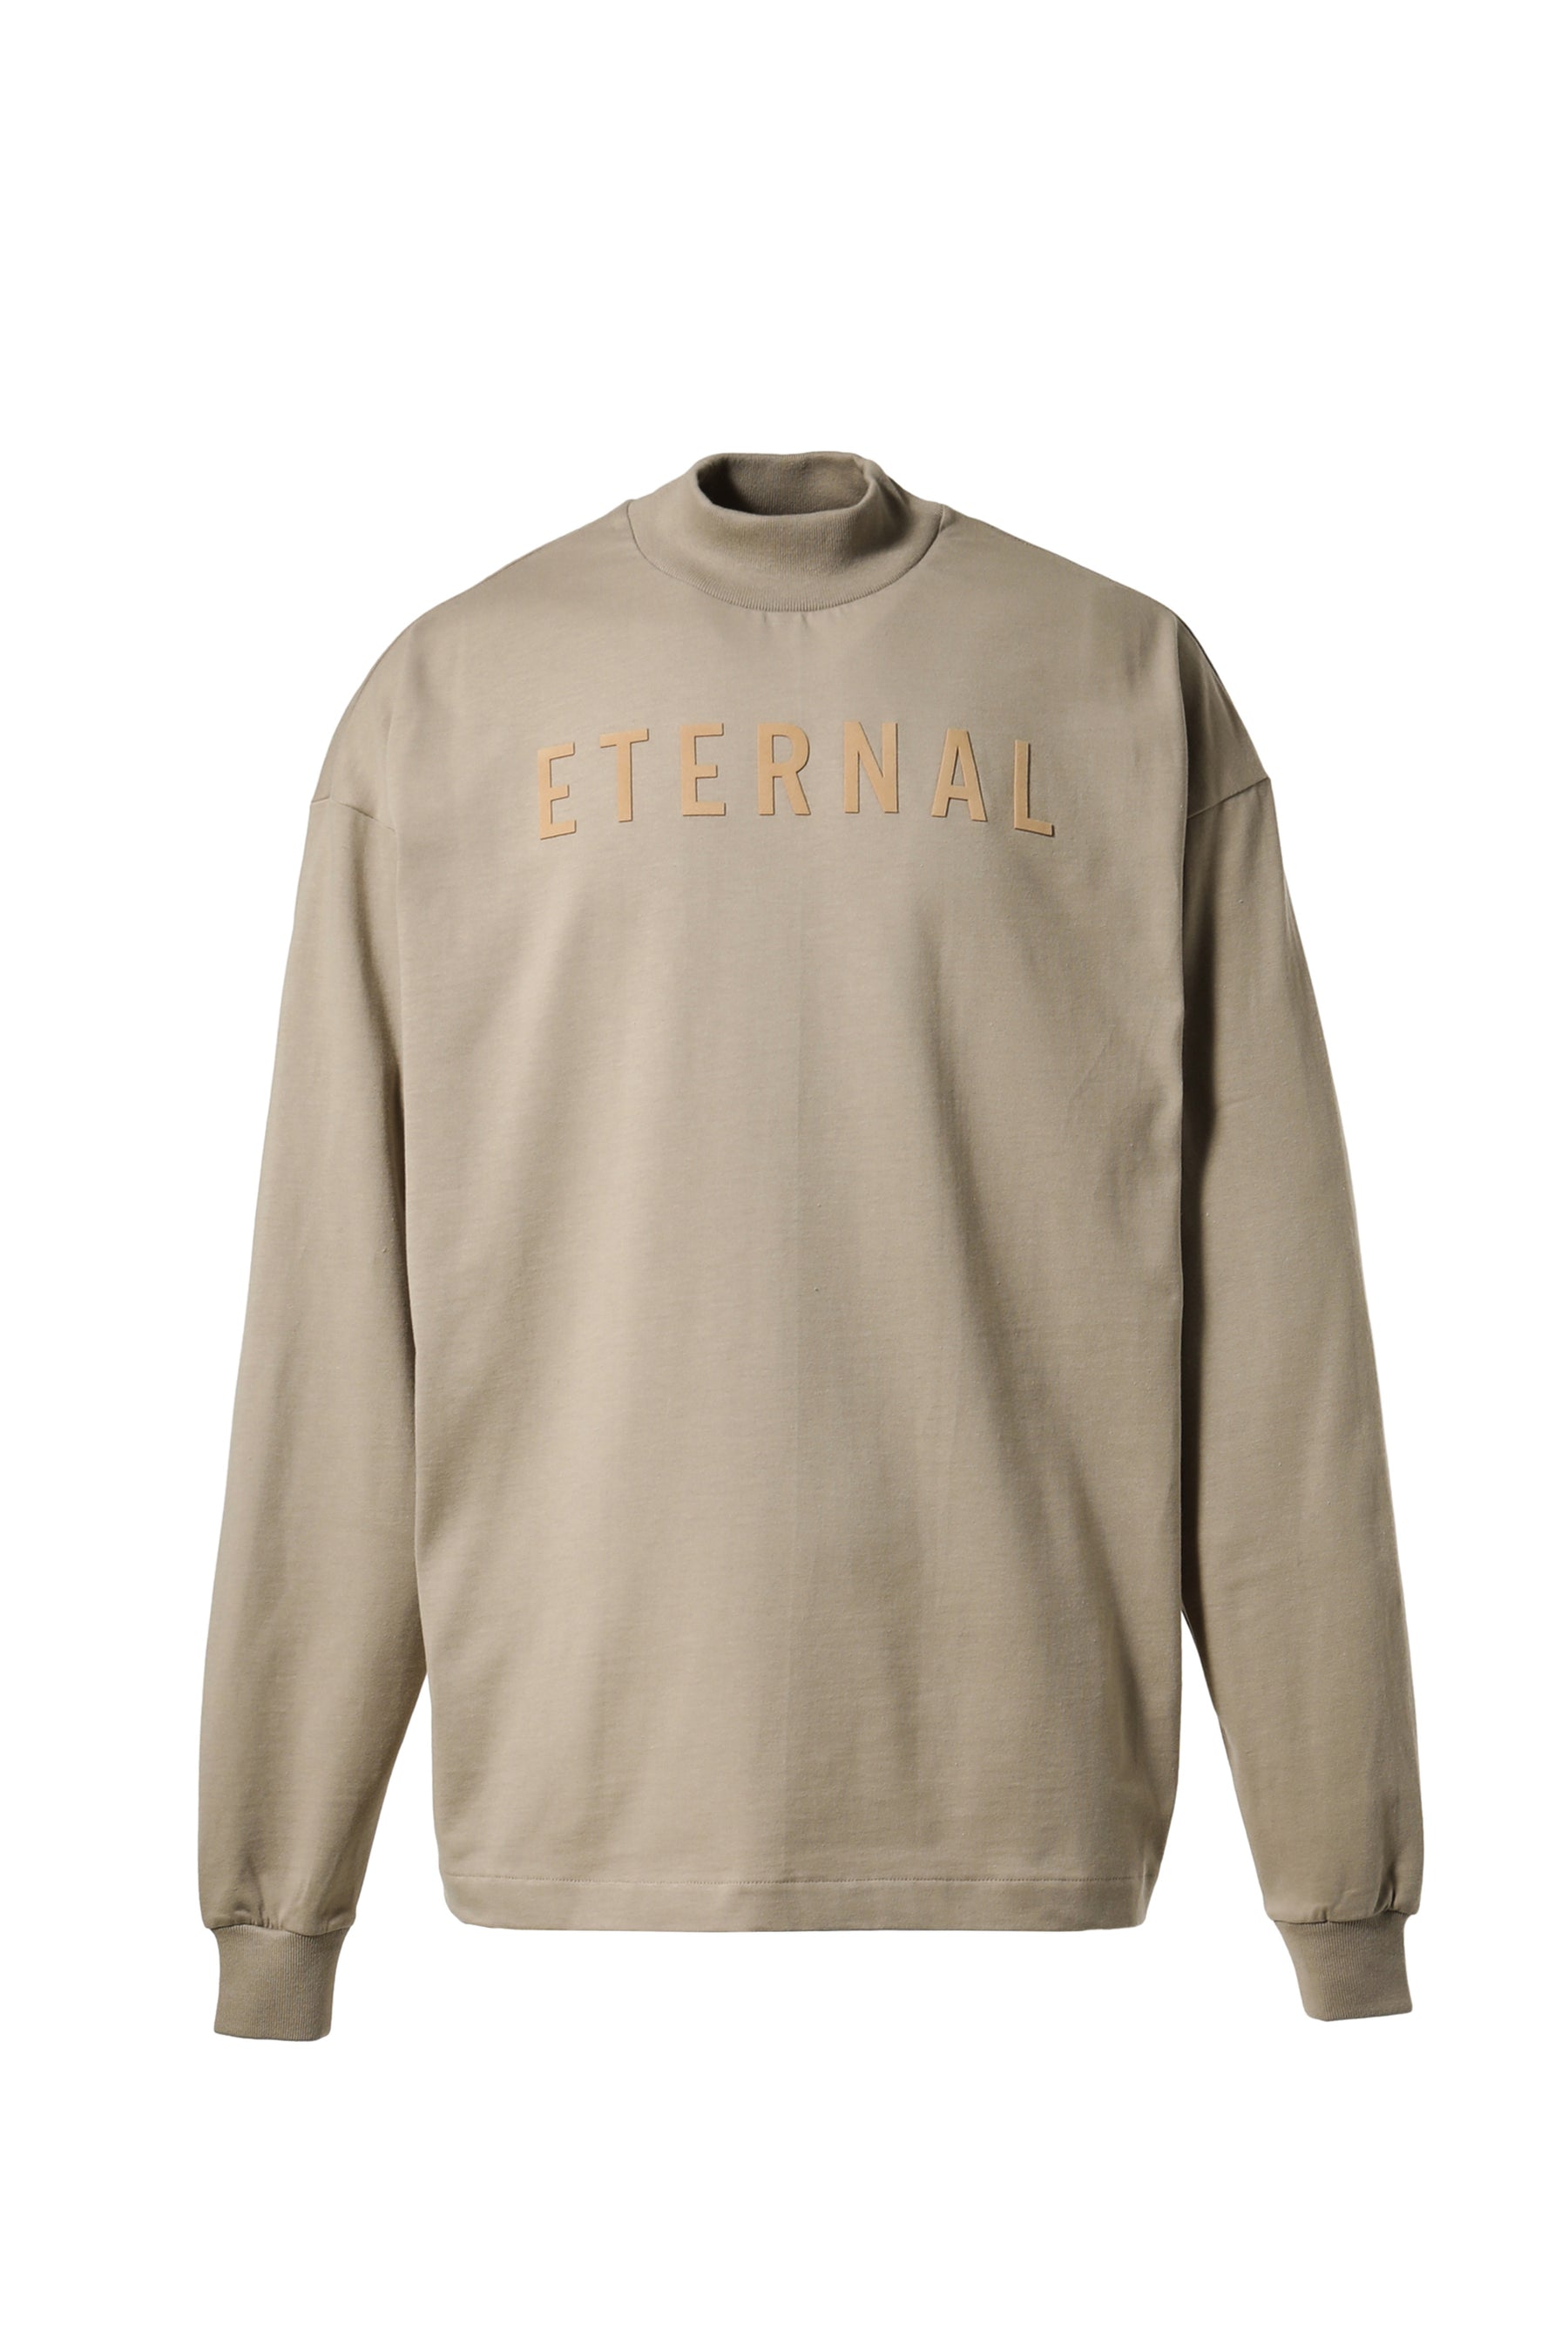 FEAR OF GOD THE ETERNAL COLLECTION フィアオブゴッド エターナル ...